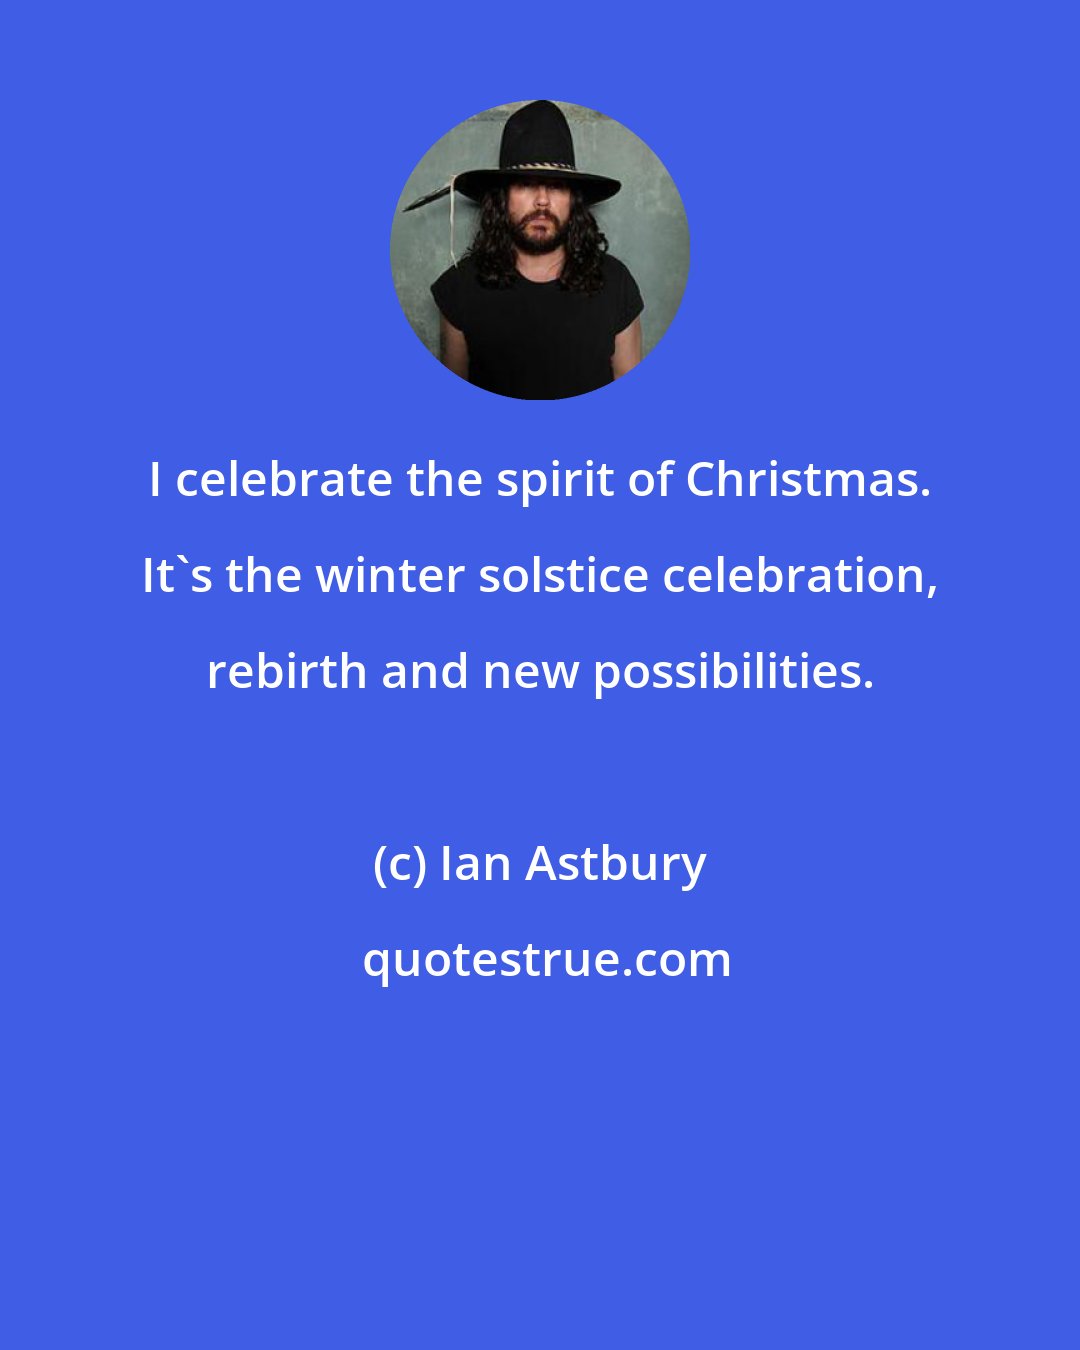 Ian Astbury: I celebrate the spirit of Christmas. It's the winter solstice celebration, rebirth and new possibilities.